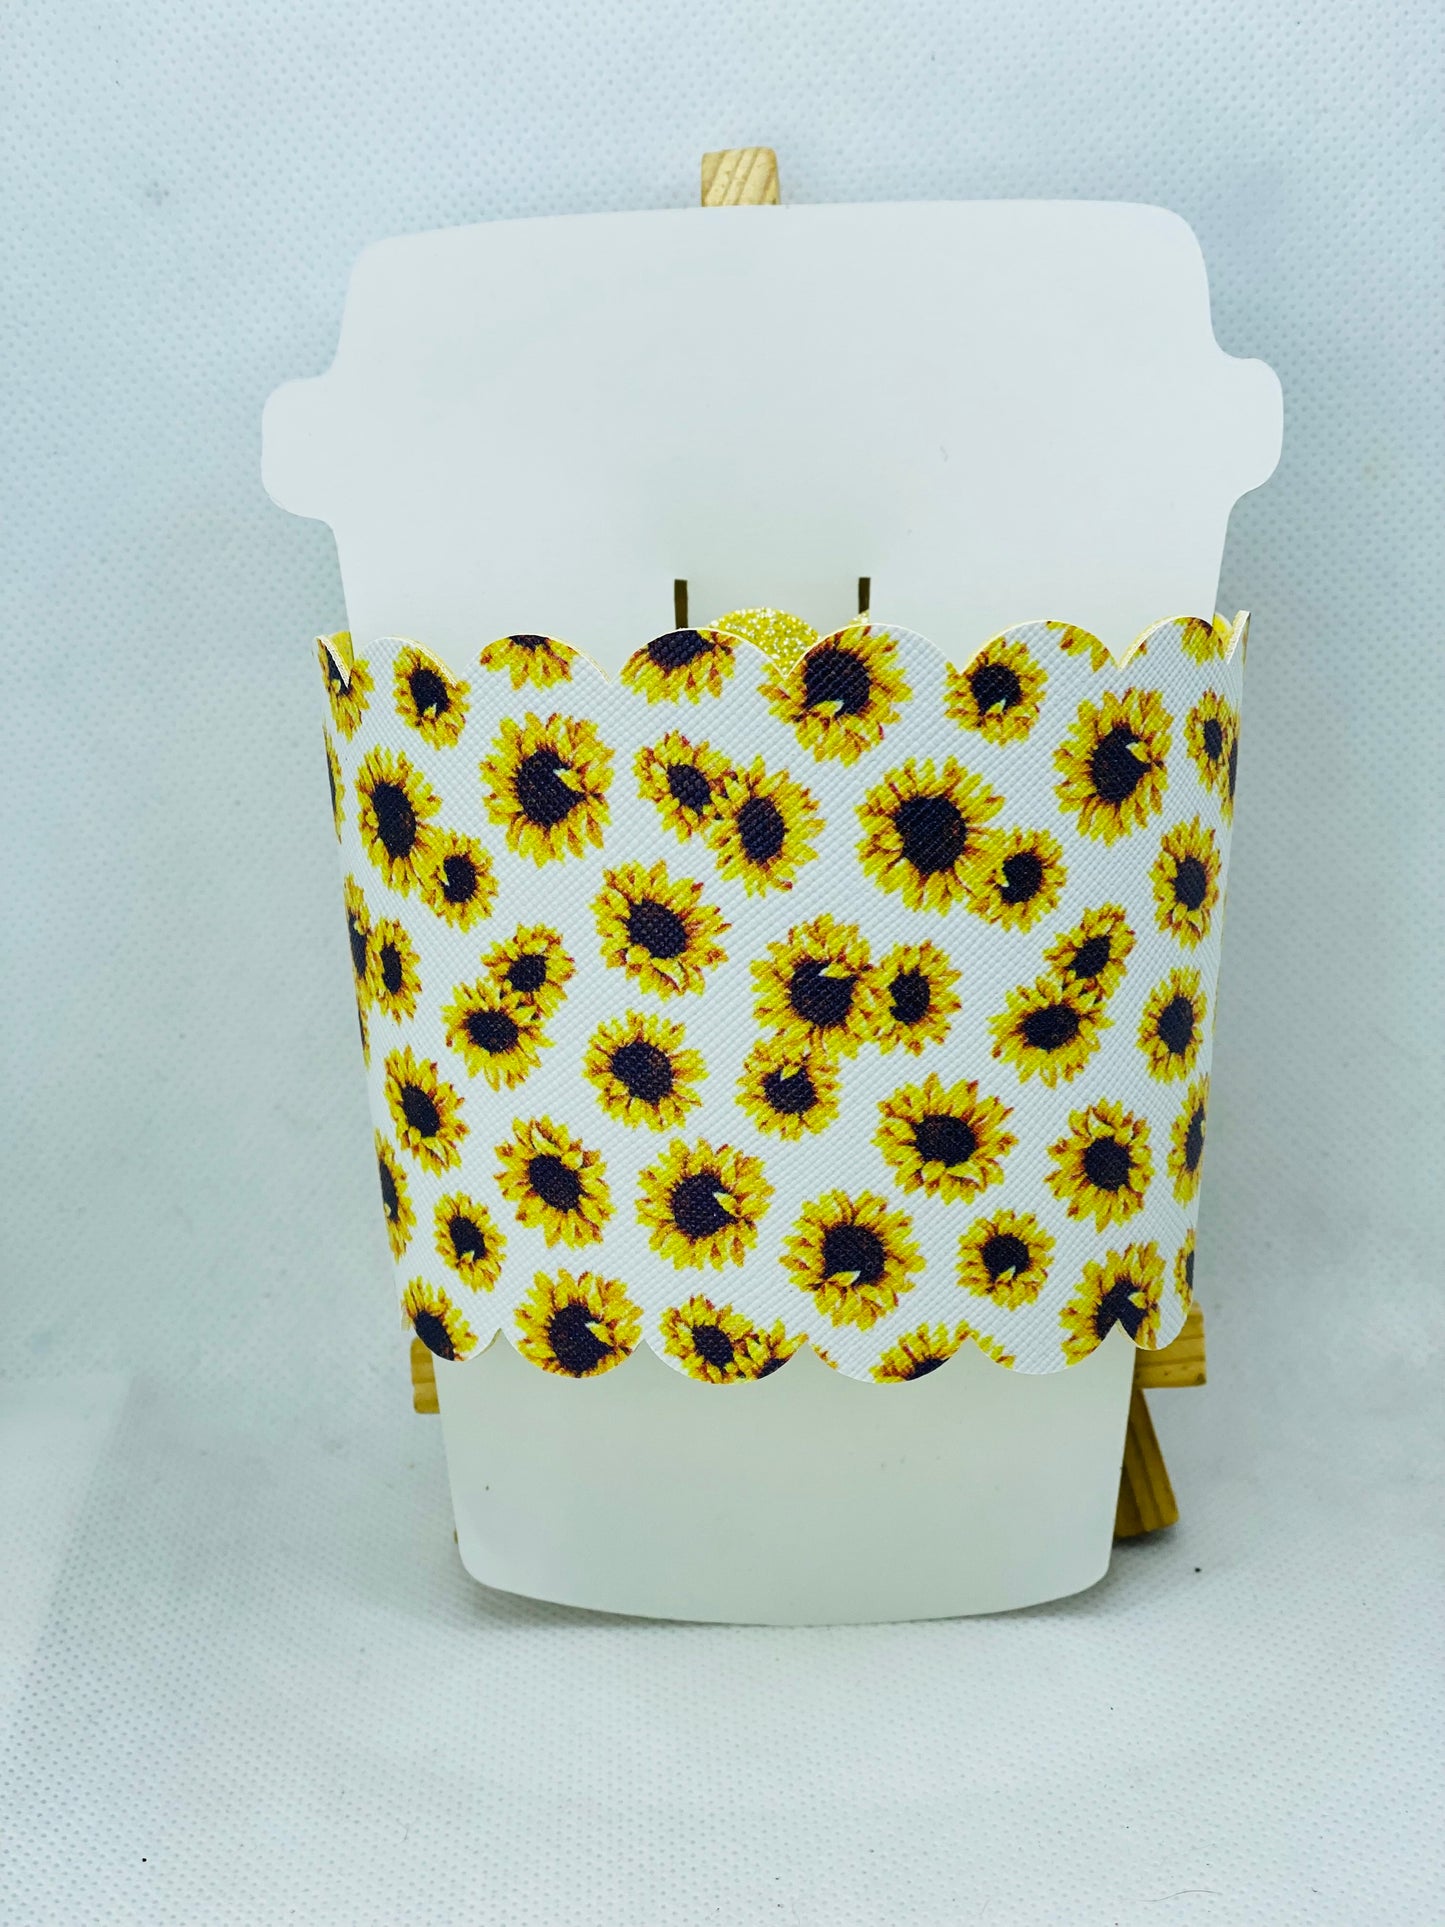 Sunflowers - Scalloped Edge- Hot Cup Coozie Sleeve - Faux Leather Drink Sleeve